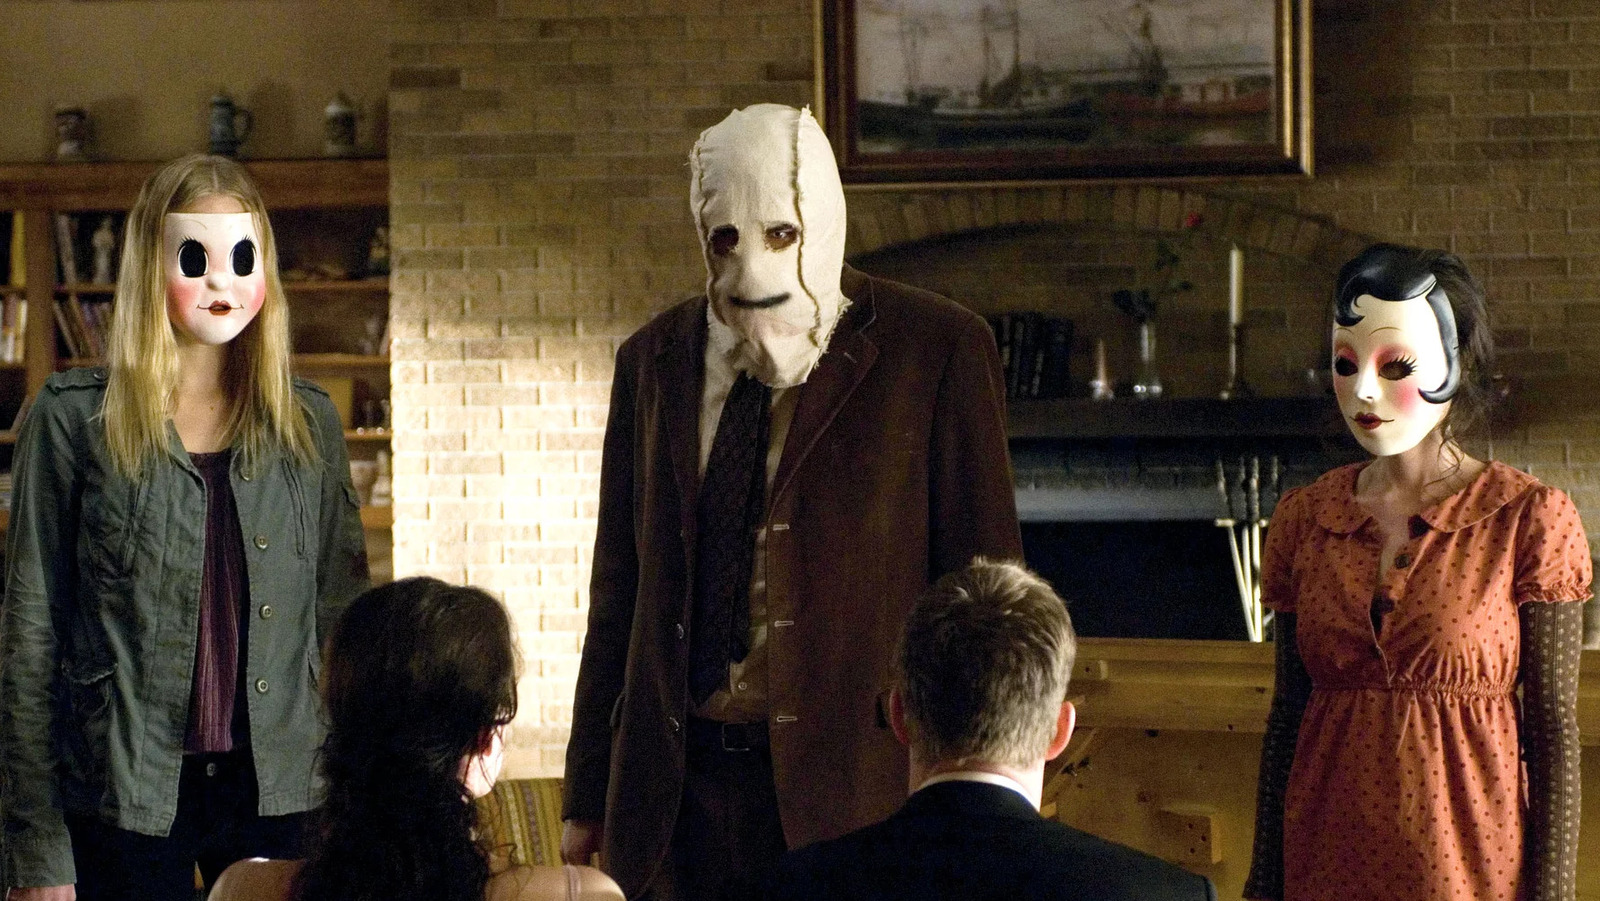 The Strangers Everything We Know So Far About The Reboot Trilogy